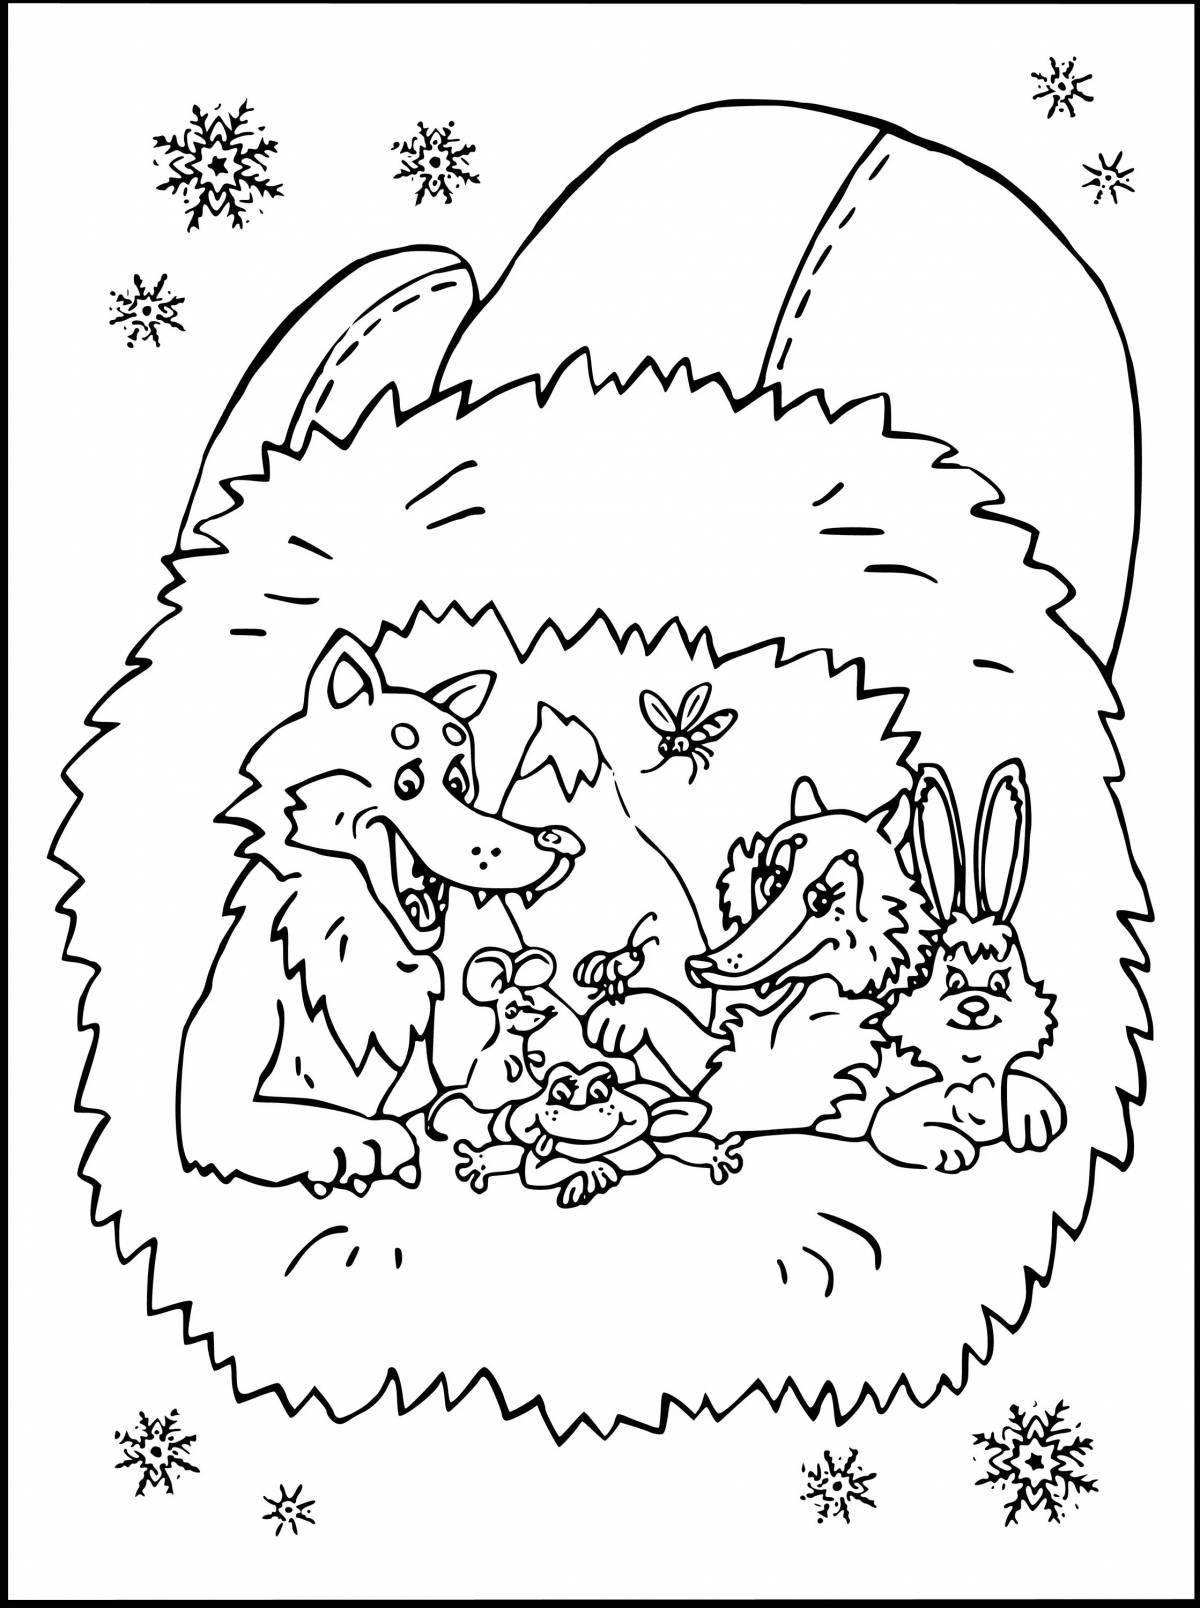 Glorious fairy tale coloring book for children